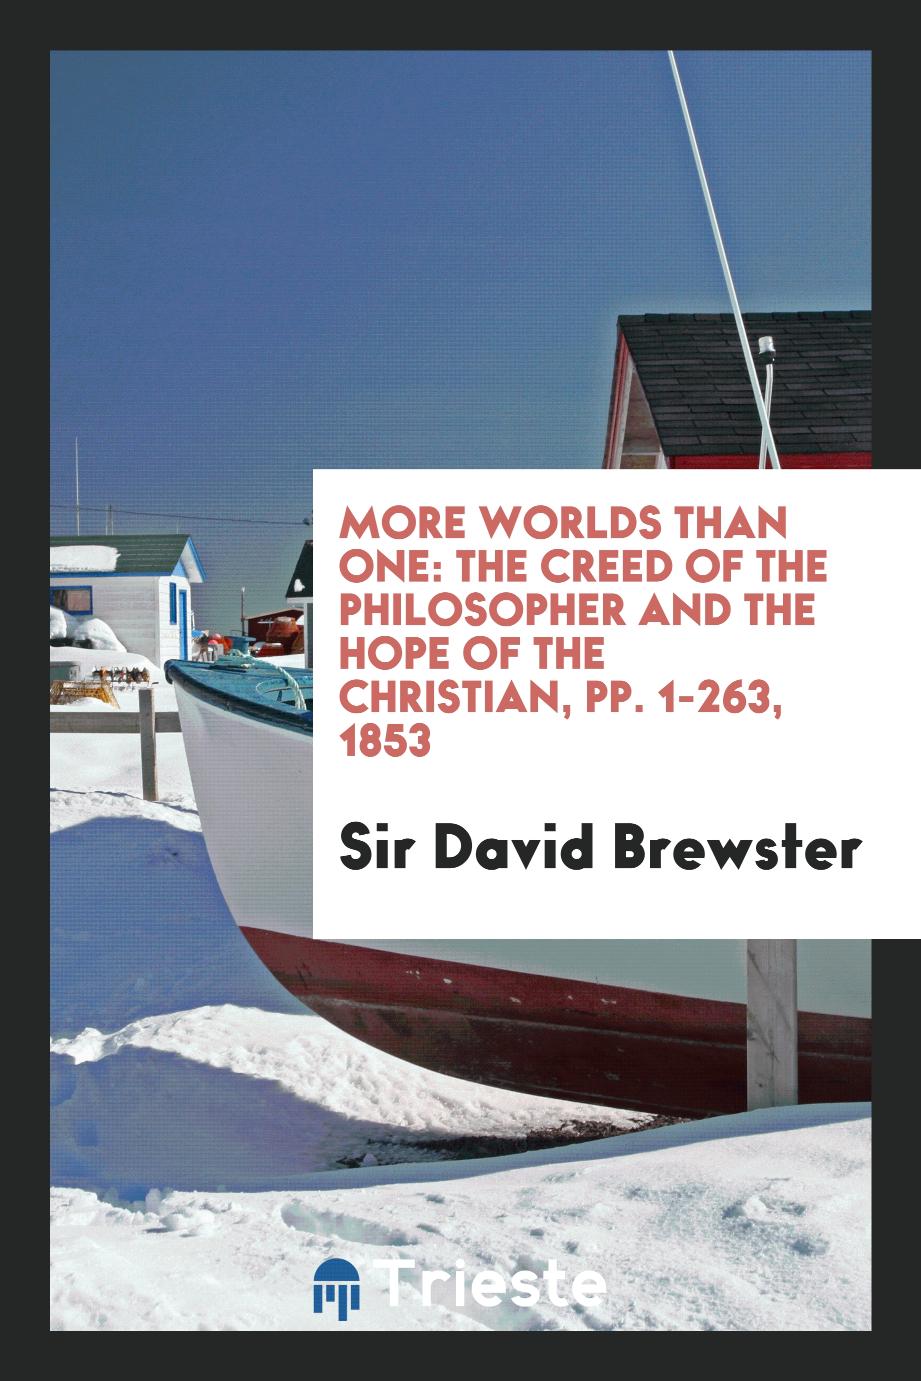 More Worlds Than One: The Creed of the Philosopher and the Hope of the Christian, pp. 1-263, 1853